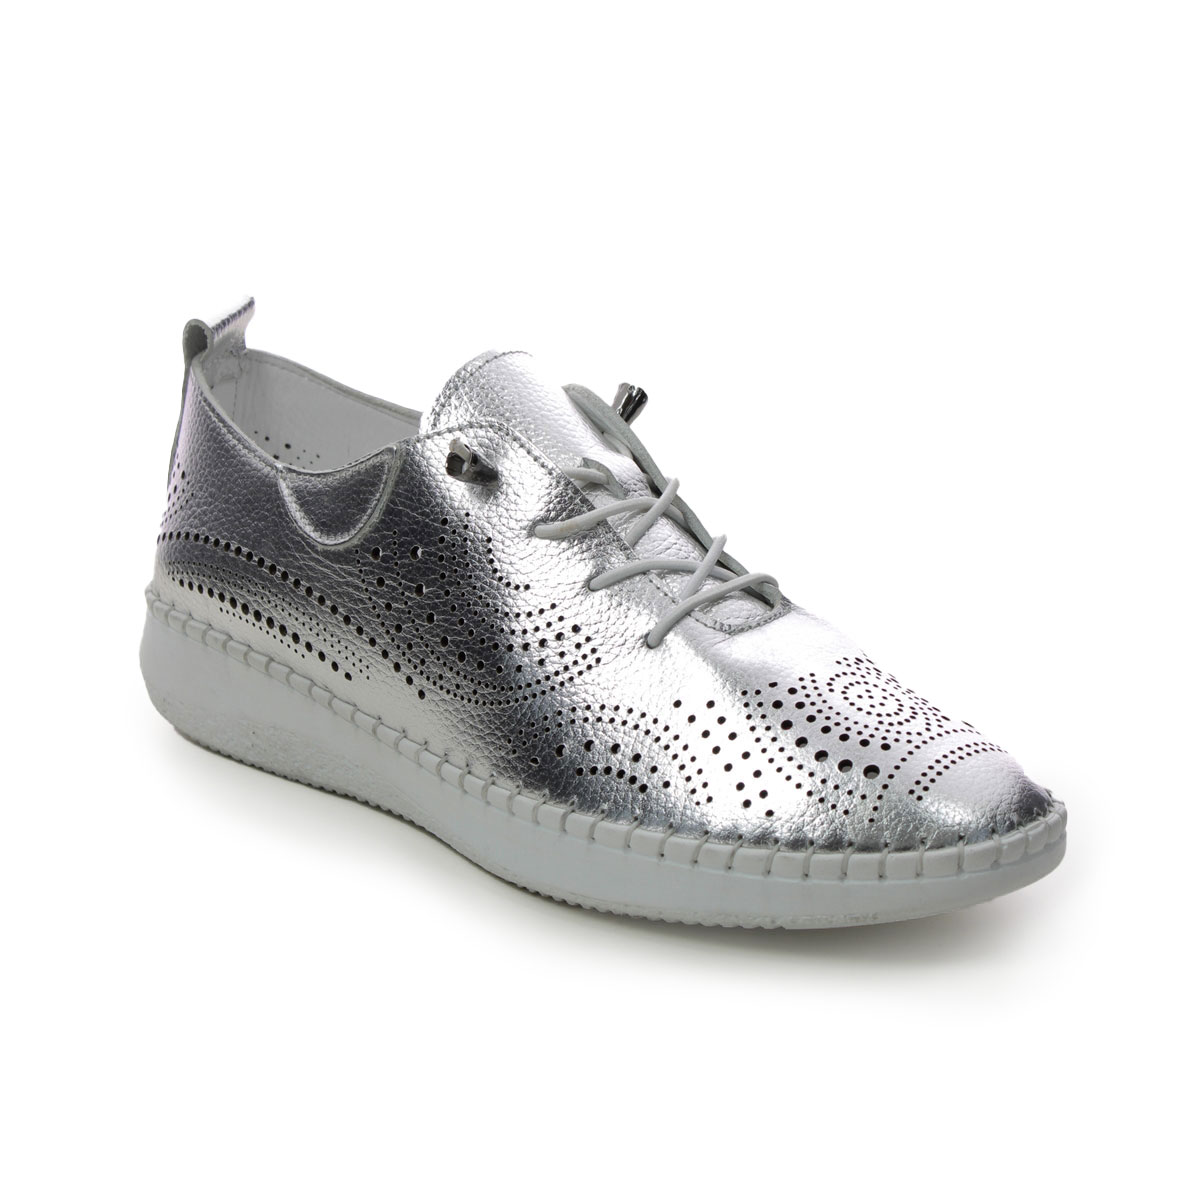 Lotus Katya Silver Womens lacing shoes in a Plain Leather in Size 6